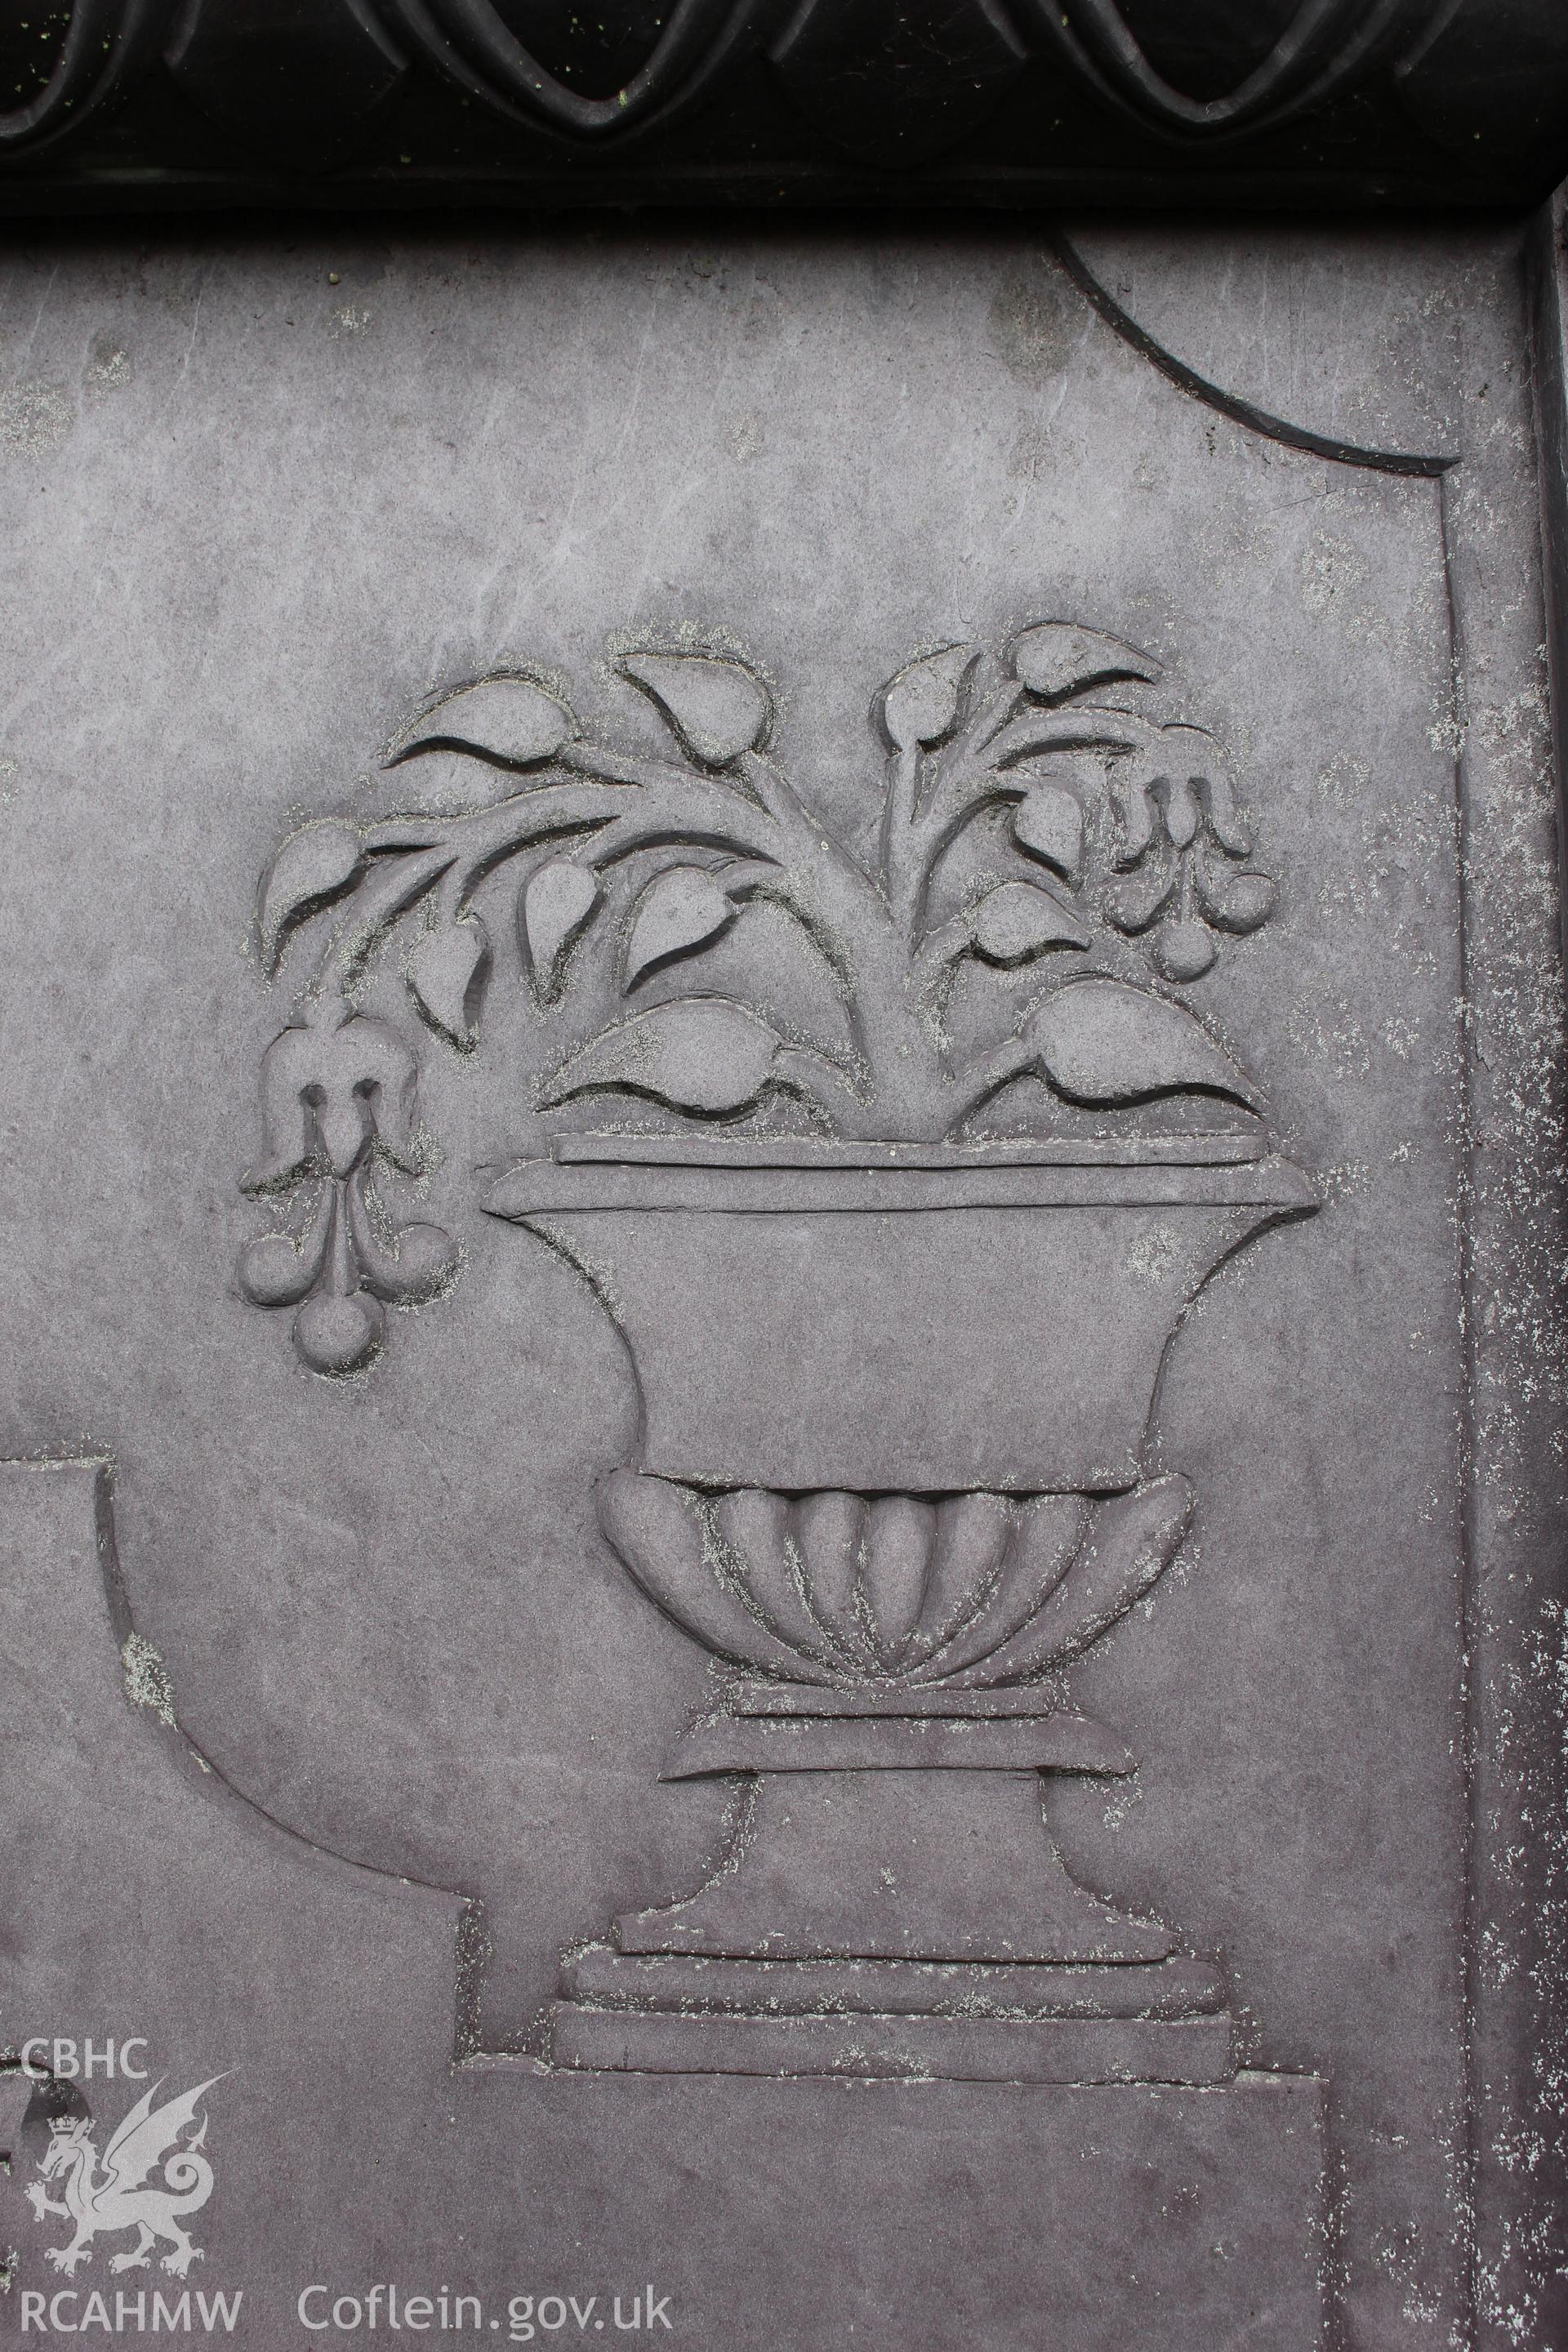 Carved detail on the gravestone of Mary & Minnie Thomas